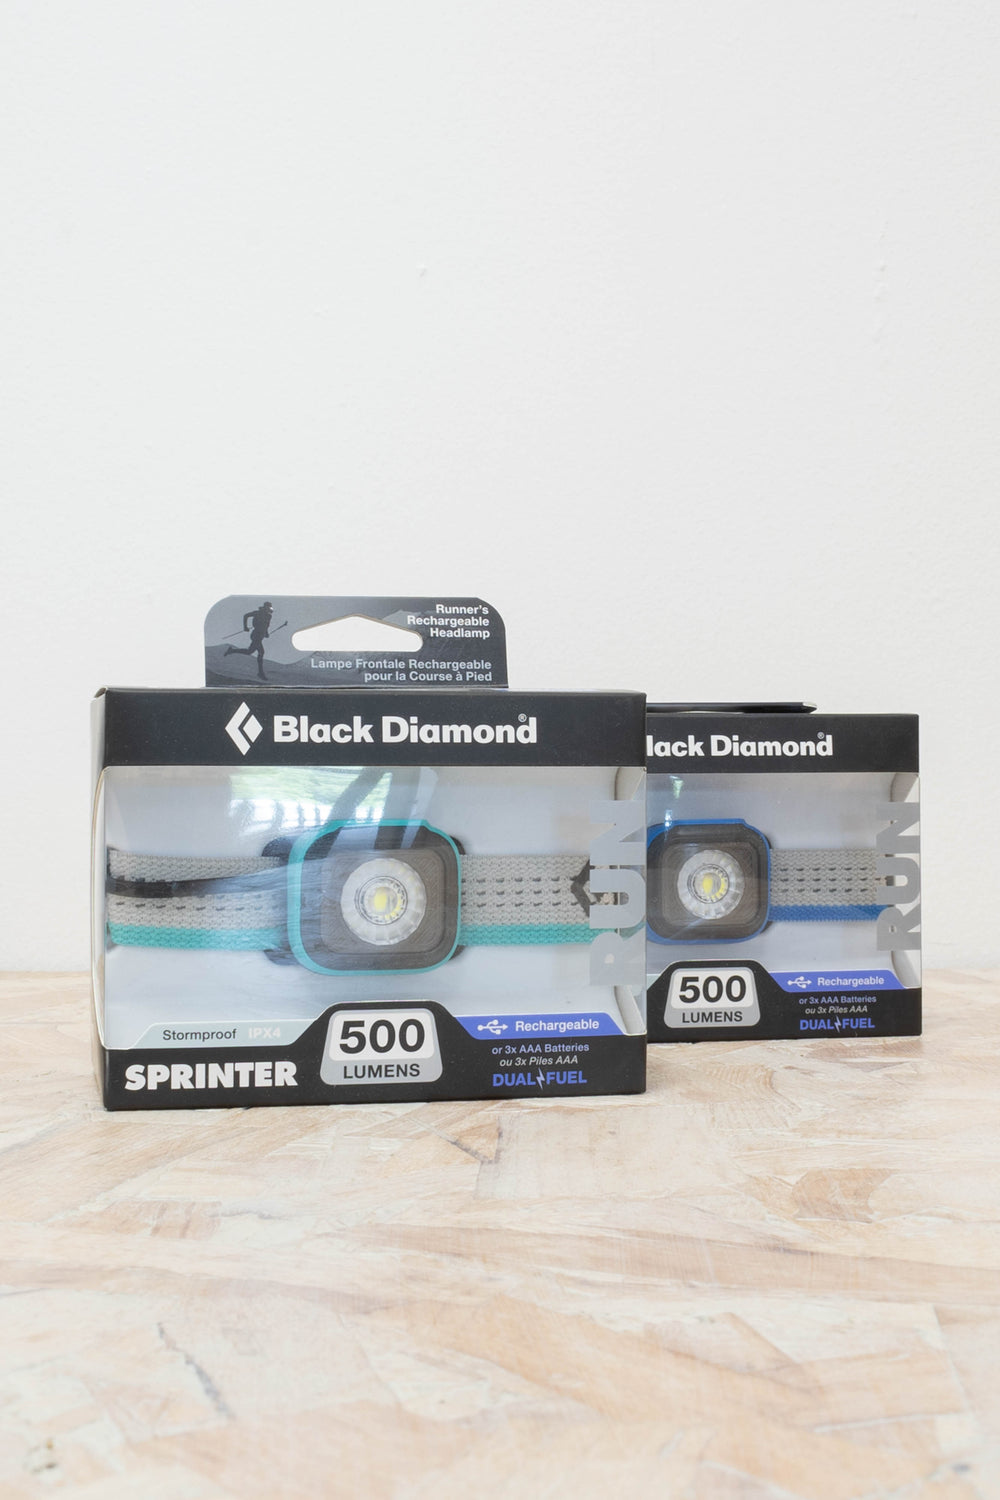 Black Diamond Sprinter 500lm Lampe frontale - Lampes frontales